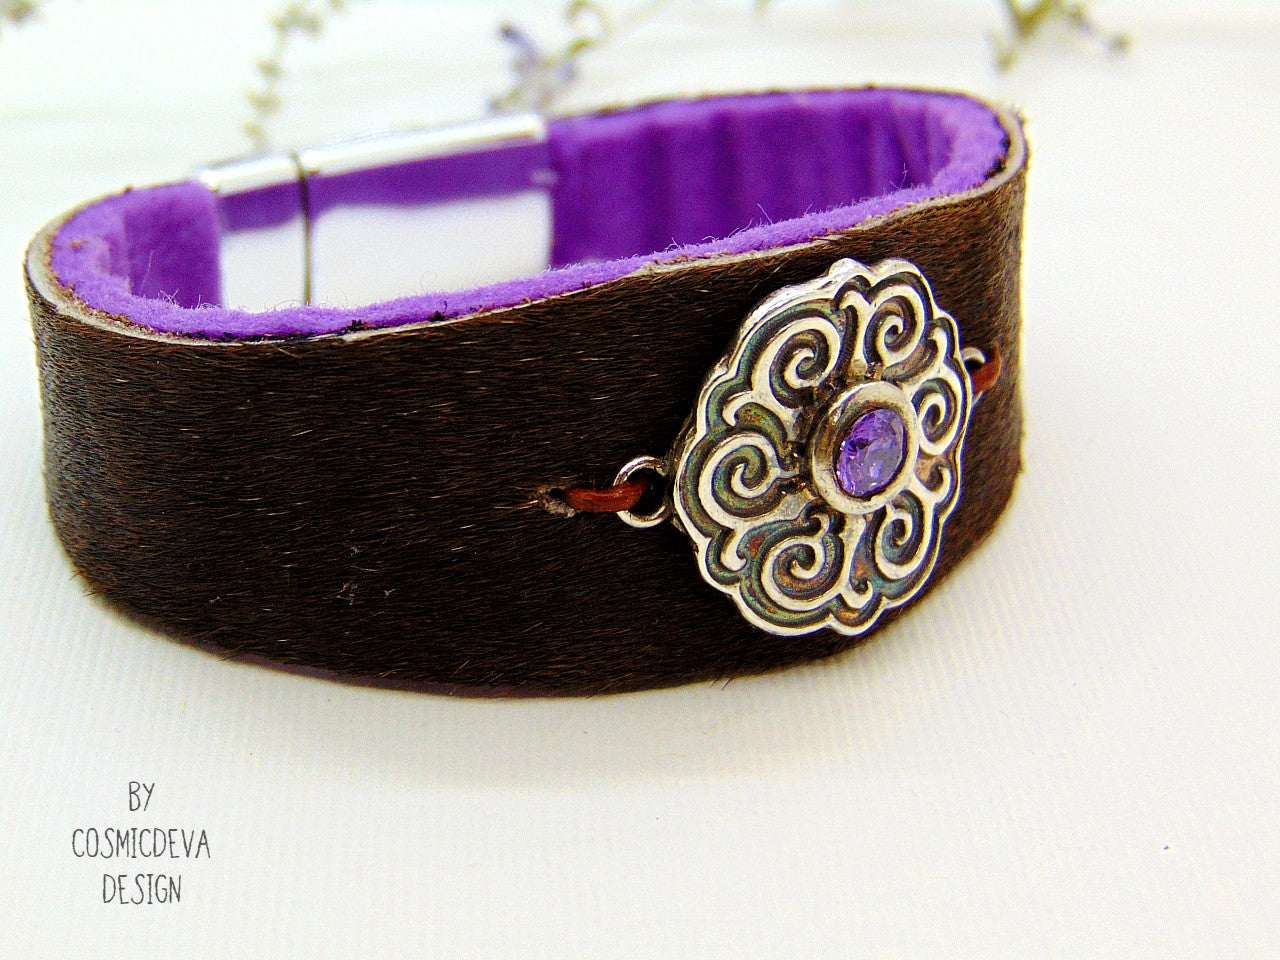 One of a kind handcrafted leather cuff bracelet made of hand cut earthy brown hair on cowhide leather. The focal point is a purple cubic zirconia amethyst in a bezel setting on a Celtic design textured solid 950 sterling silver disc. The inside of the leather bracelet is lined light purple/ lilac felt for your comfort. The handmade bracelet has silver colored stainless steel magnetic clasp which makes it easy to open and close.